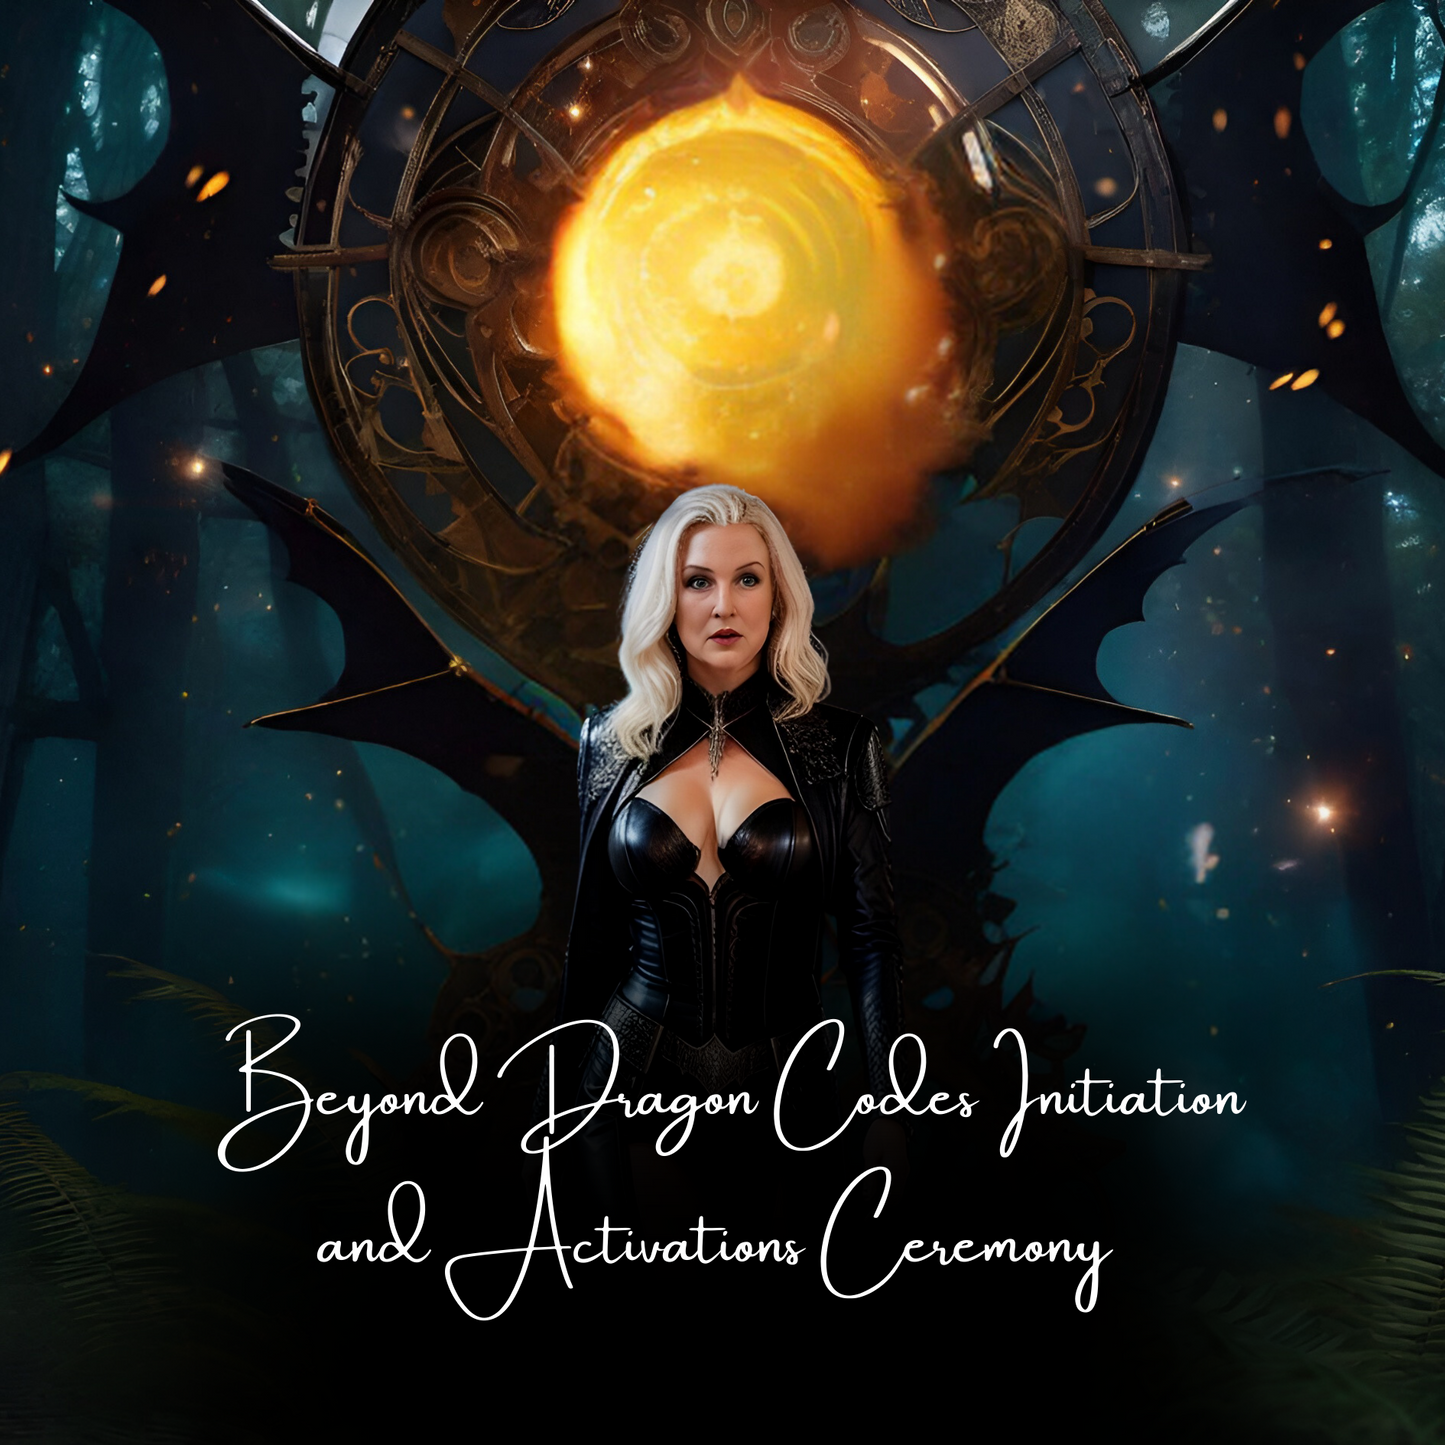 Beyond Dragon Codes Initiation and Activations Ceremony